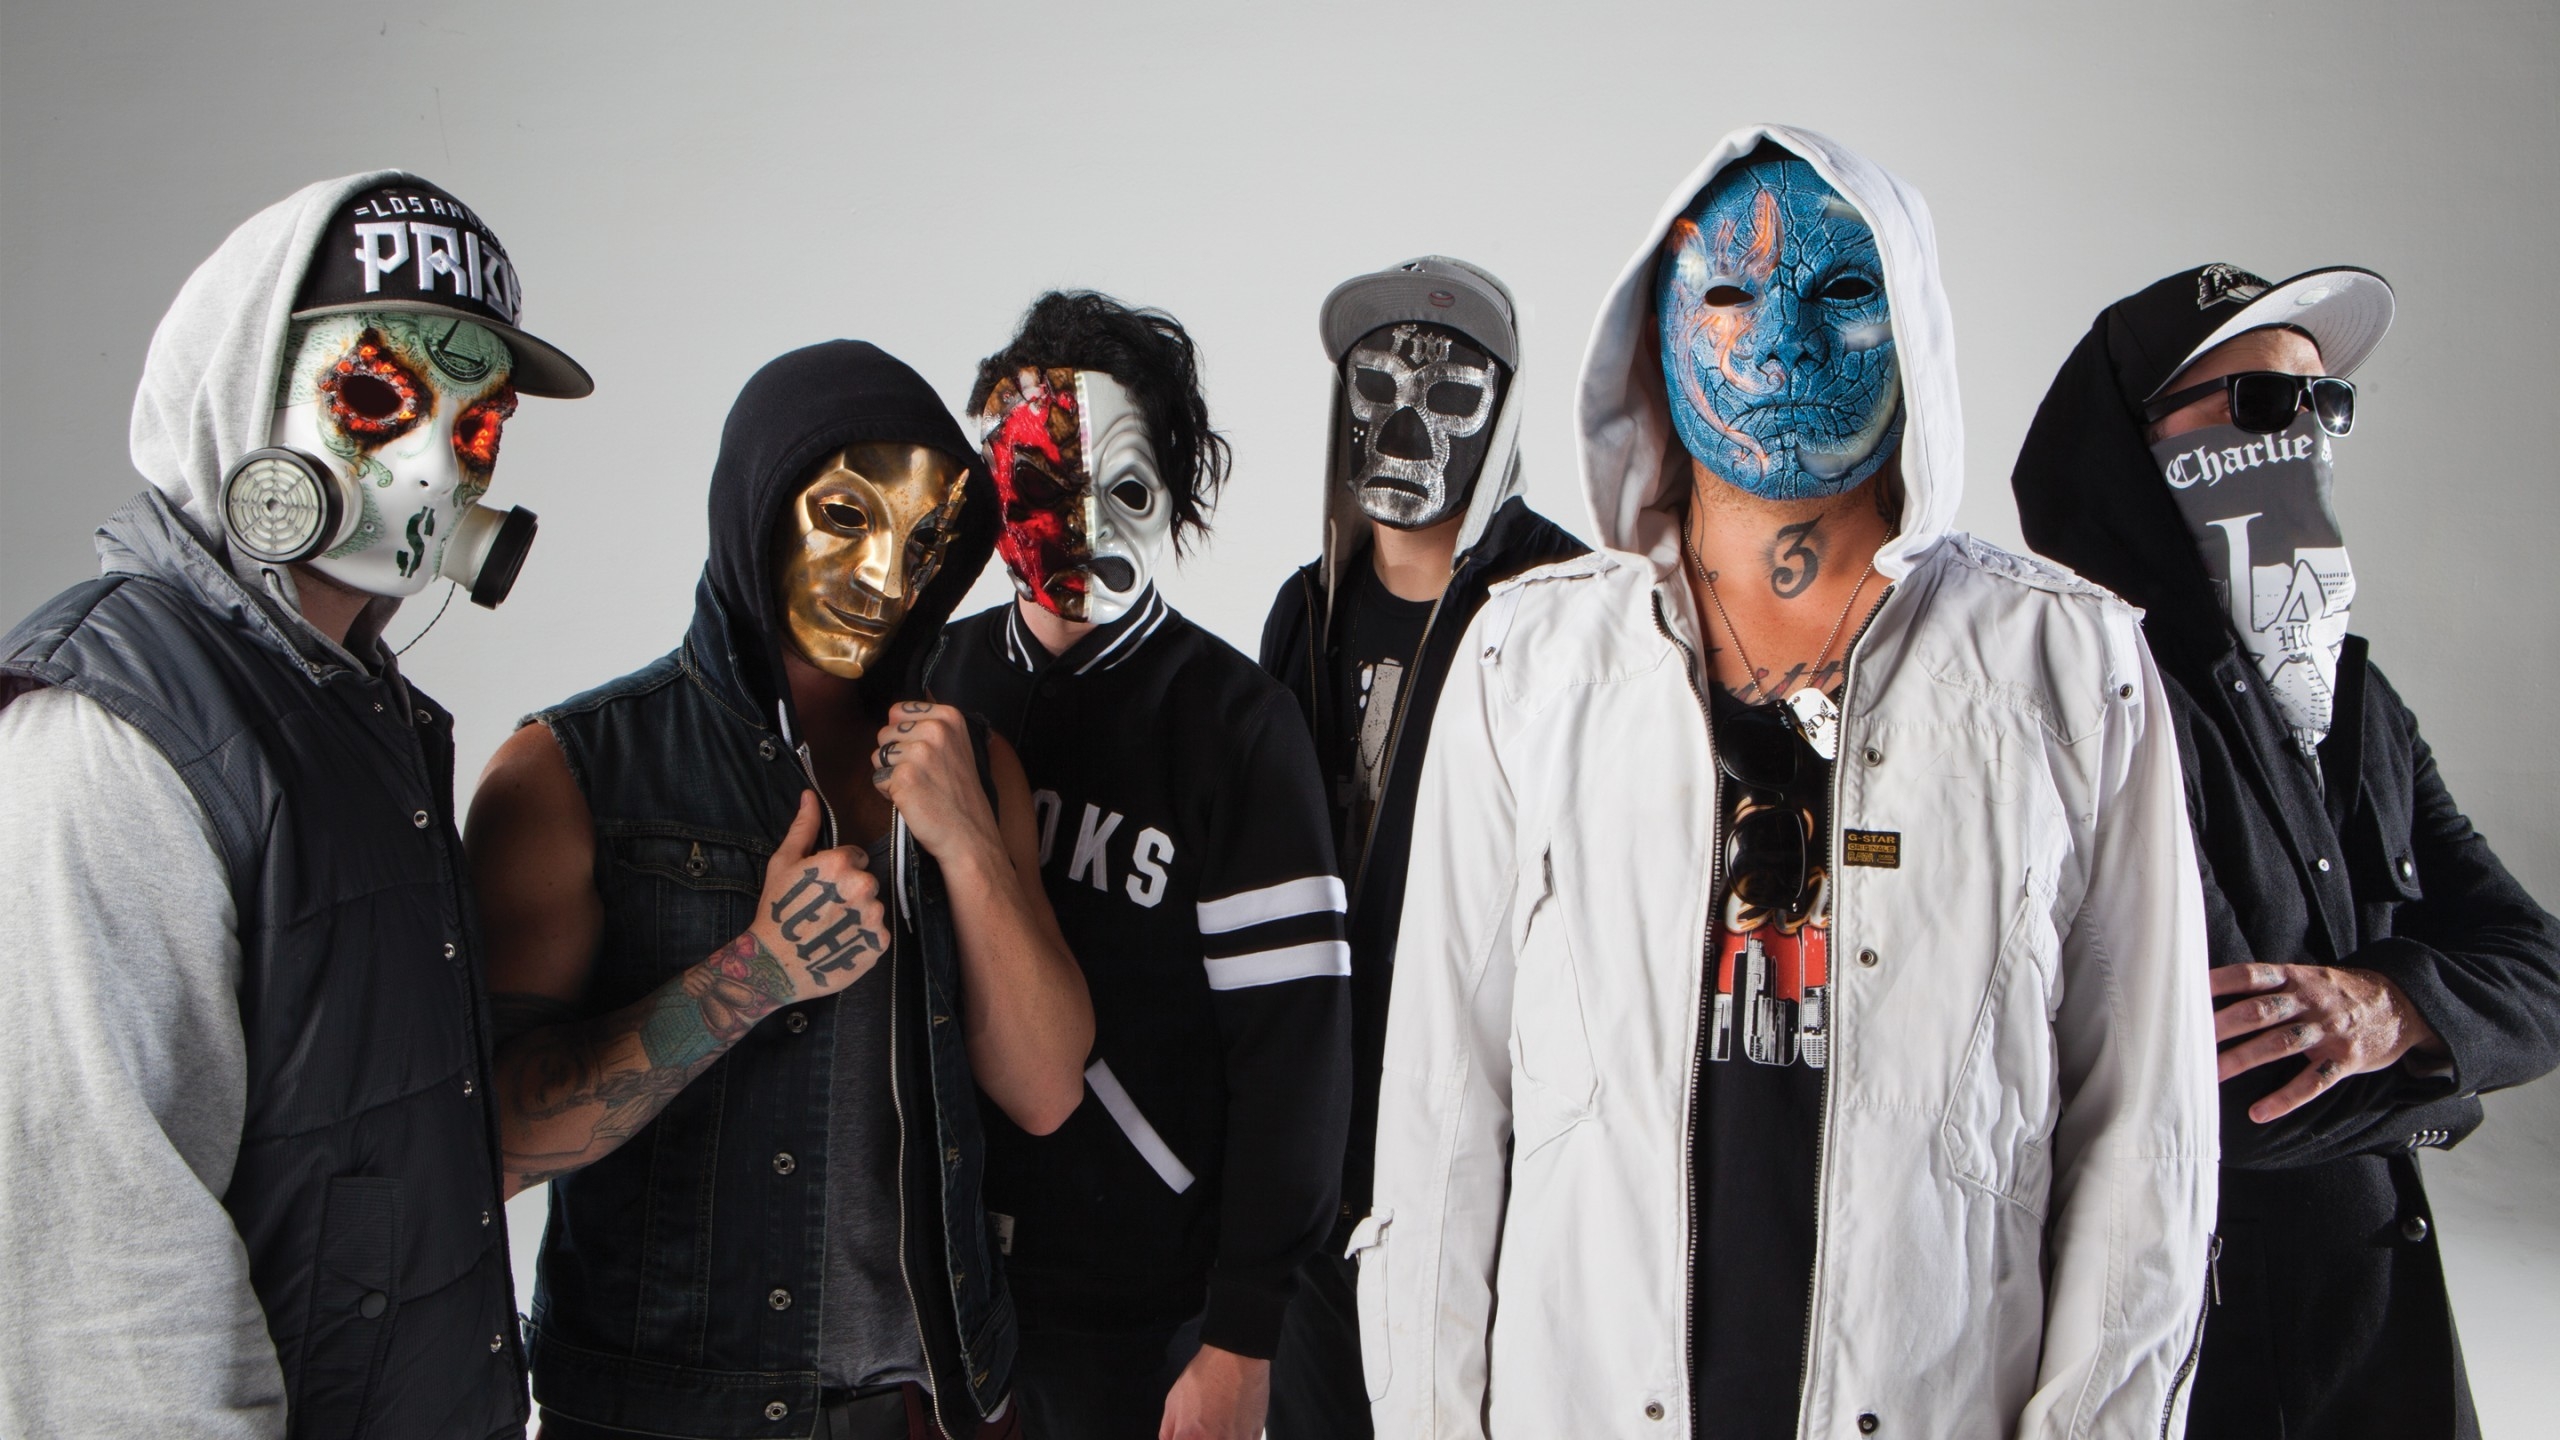 Hollywood Undead Cool for 2560x1440 HDTV resolution